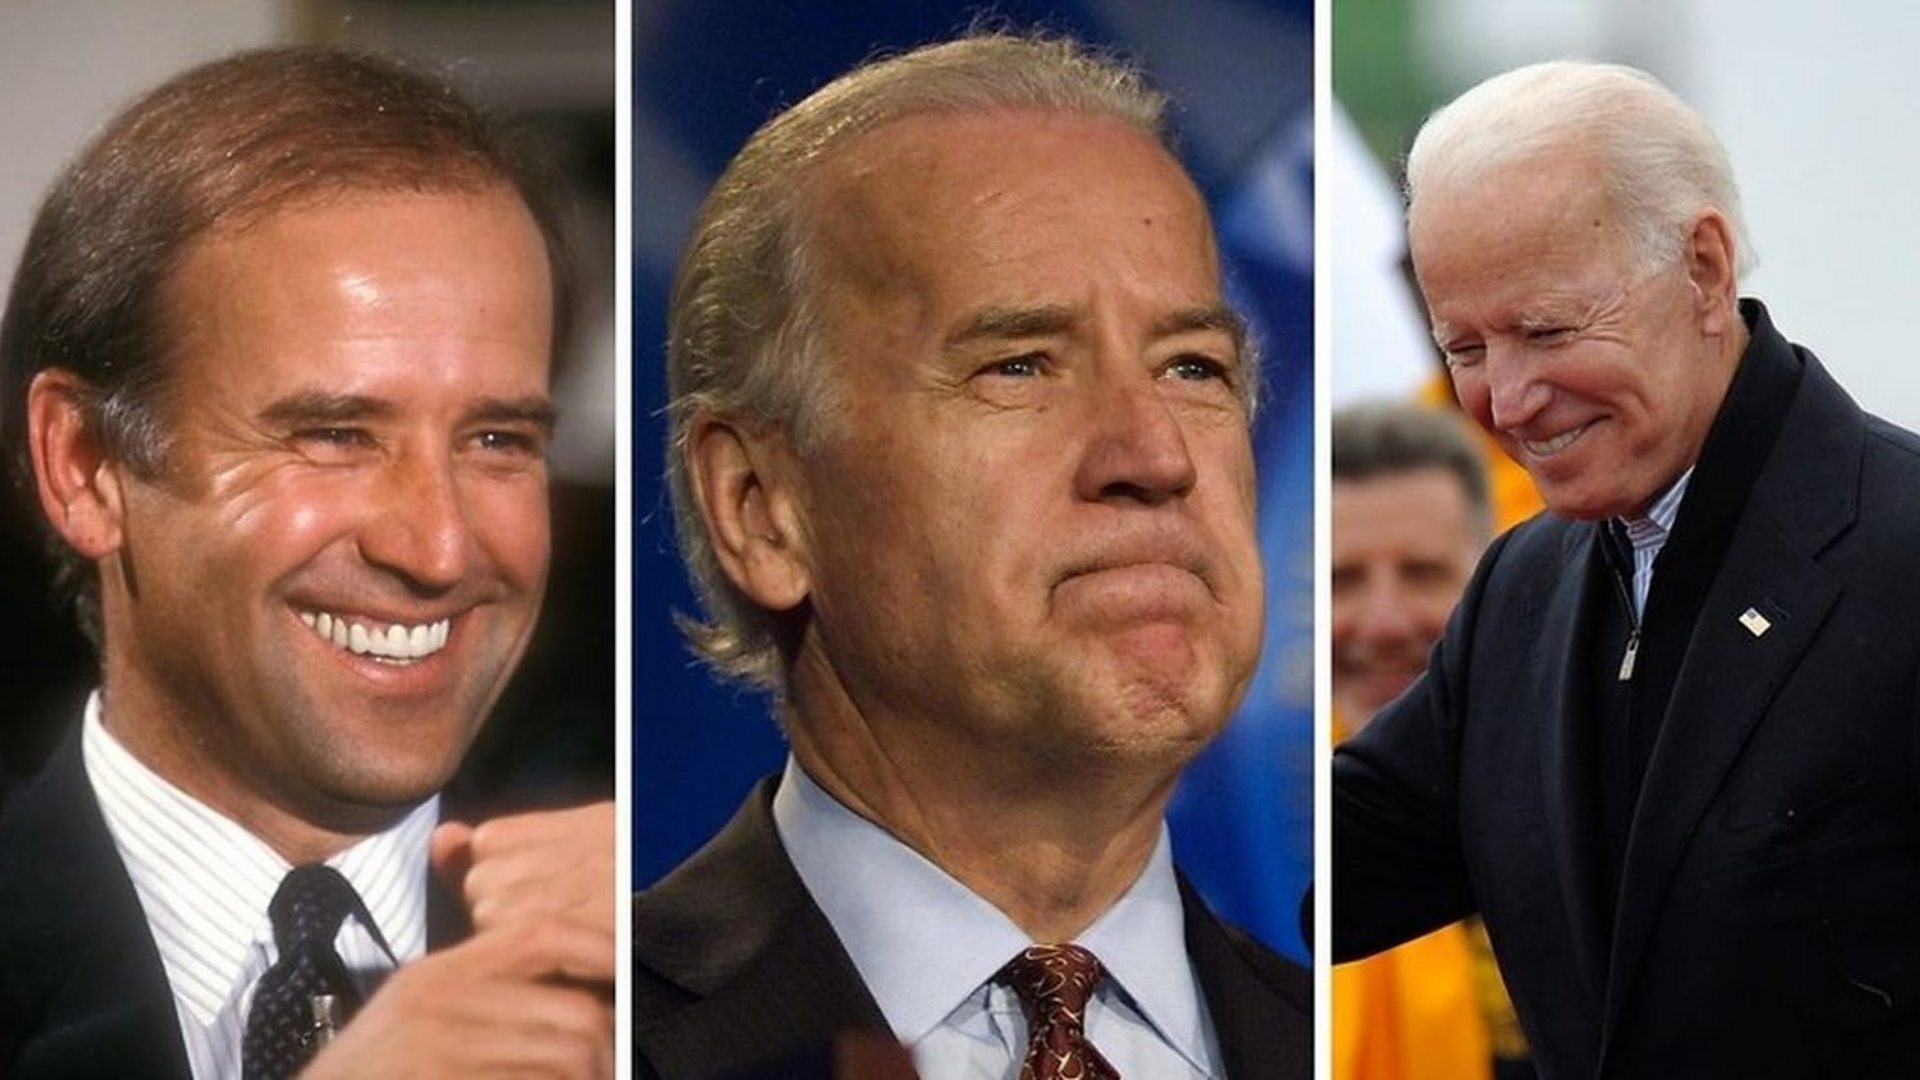 what did joe biden say at anita hill hearing - Biden|President|Joe|Years|Trump|Delaware|Vice|Time|Obama|Senate|States|Law|Age|Campaign|Election|Administration|Family|House|Senator|Office|School|Wife|People|Hunter|University|Act|State|Year|Life|Party|Committee|Children|Beau|Daughter|War|Jill|Day|Facts|Americans|Presidency|Joe Biden|United States|Vice President|White House|Law School|President Trump|Foreign Relations Committee|Donald Trump|President Biden|Presidential Campaign|Presidential Election|Democratic Party|Syracuse University|United Nations|Net Worth|Barack Obama|Judiciary Committee|Neilia Hunter|U.S. Senate|Hillary Clinton|New York Times|Obama Administration|Empty Store Shelves|Systemic Racism|Castle County Council|Archmere Academy|U.S. Senator|Vice Presidency|Second Term|Biden Administration